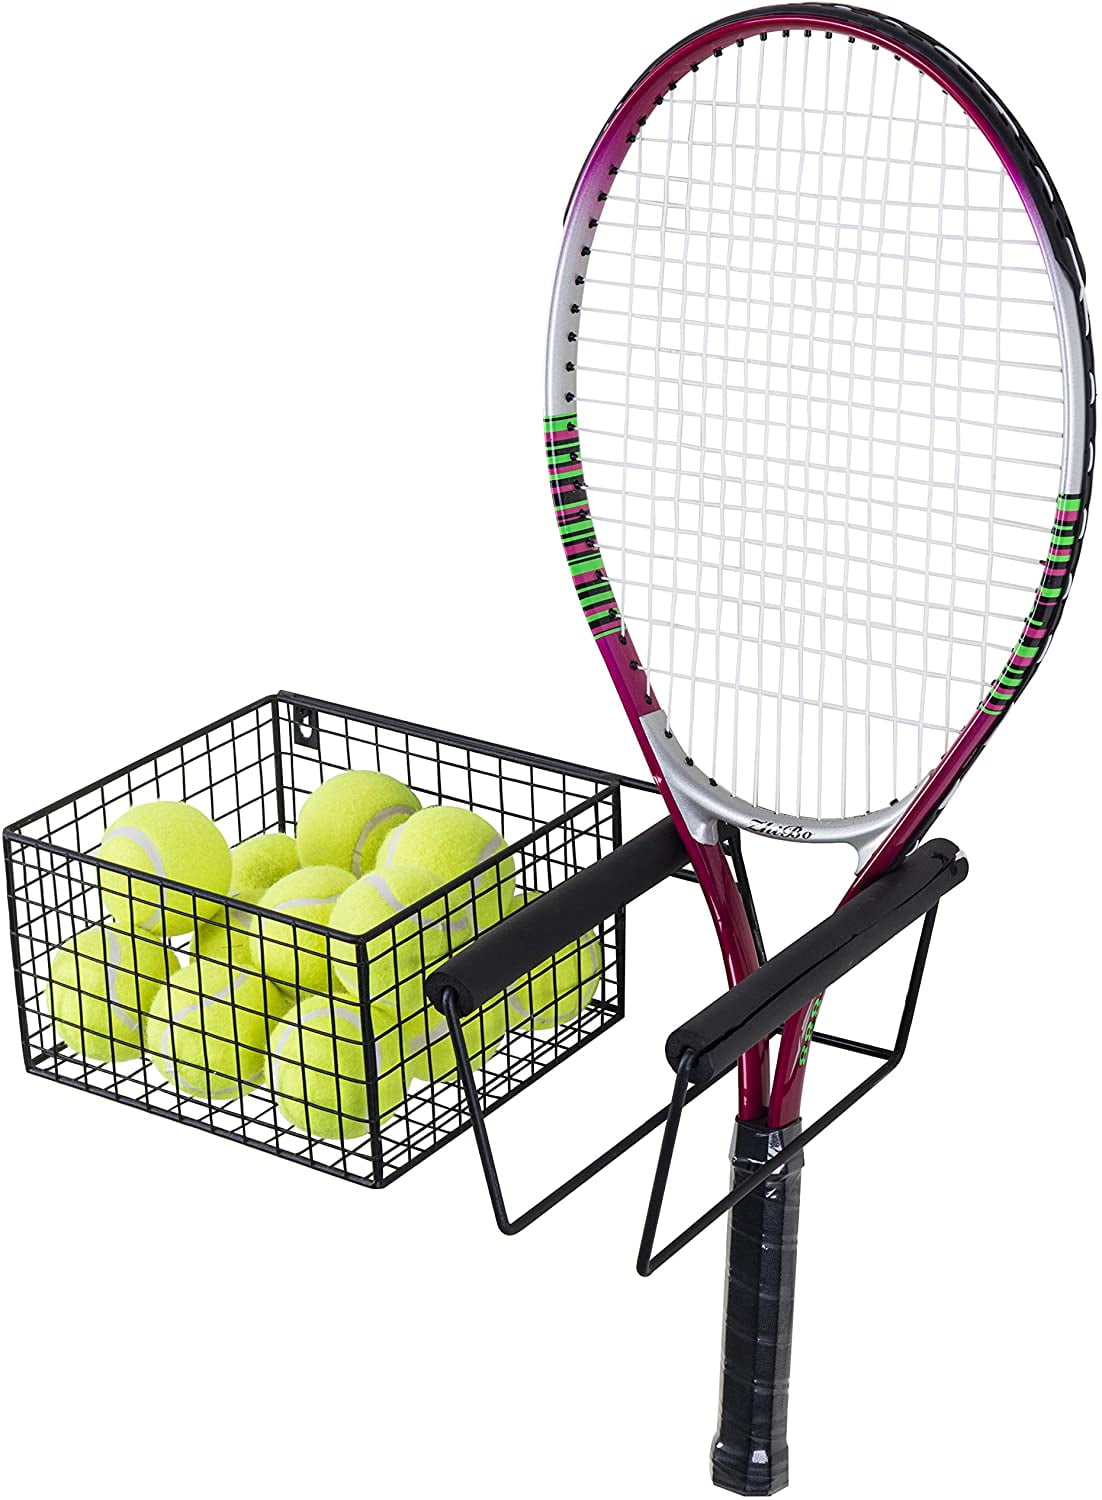 Details about   MyGift Wall Mounted Black Metal Tennis Racket Holder with Ball Storage Basket 